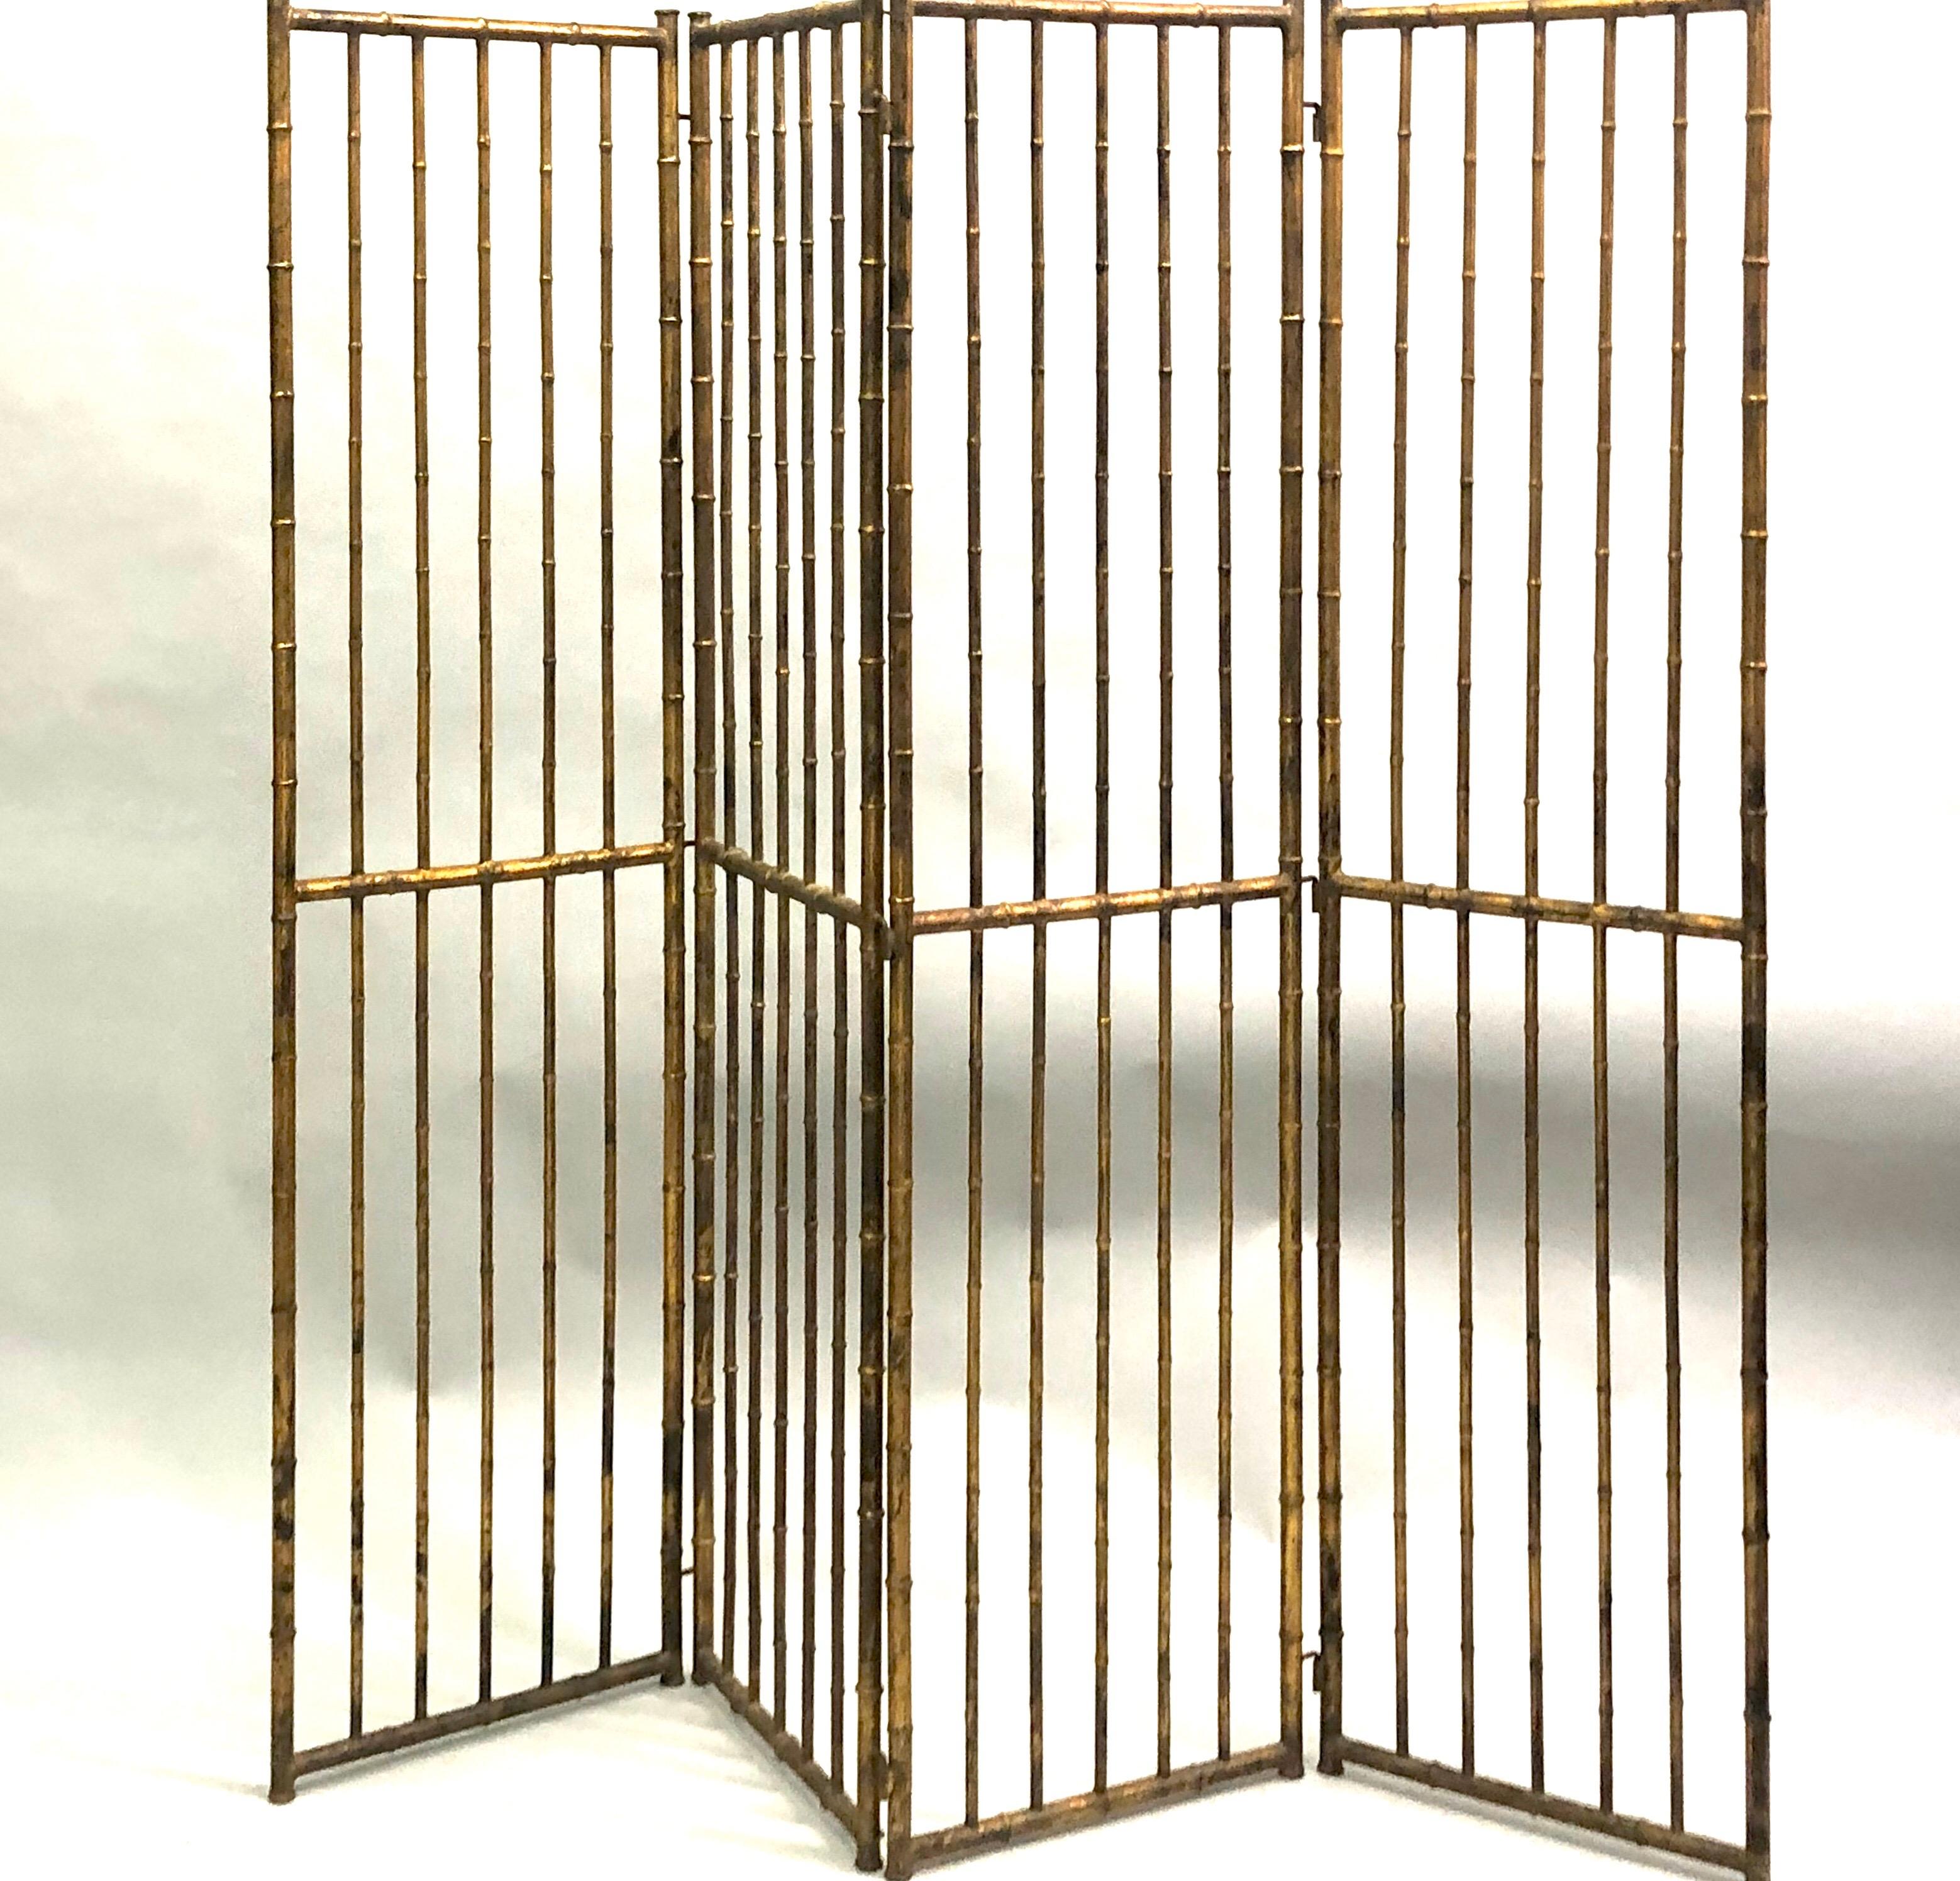 French Mid-Century Modern neoclassical screen / room divider in gilt wrought iron faux bamboo by Maison Baguès, circa 1940-1950. The elegant piece is composed of 4 panels with each panel (17.5